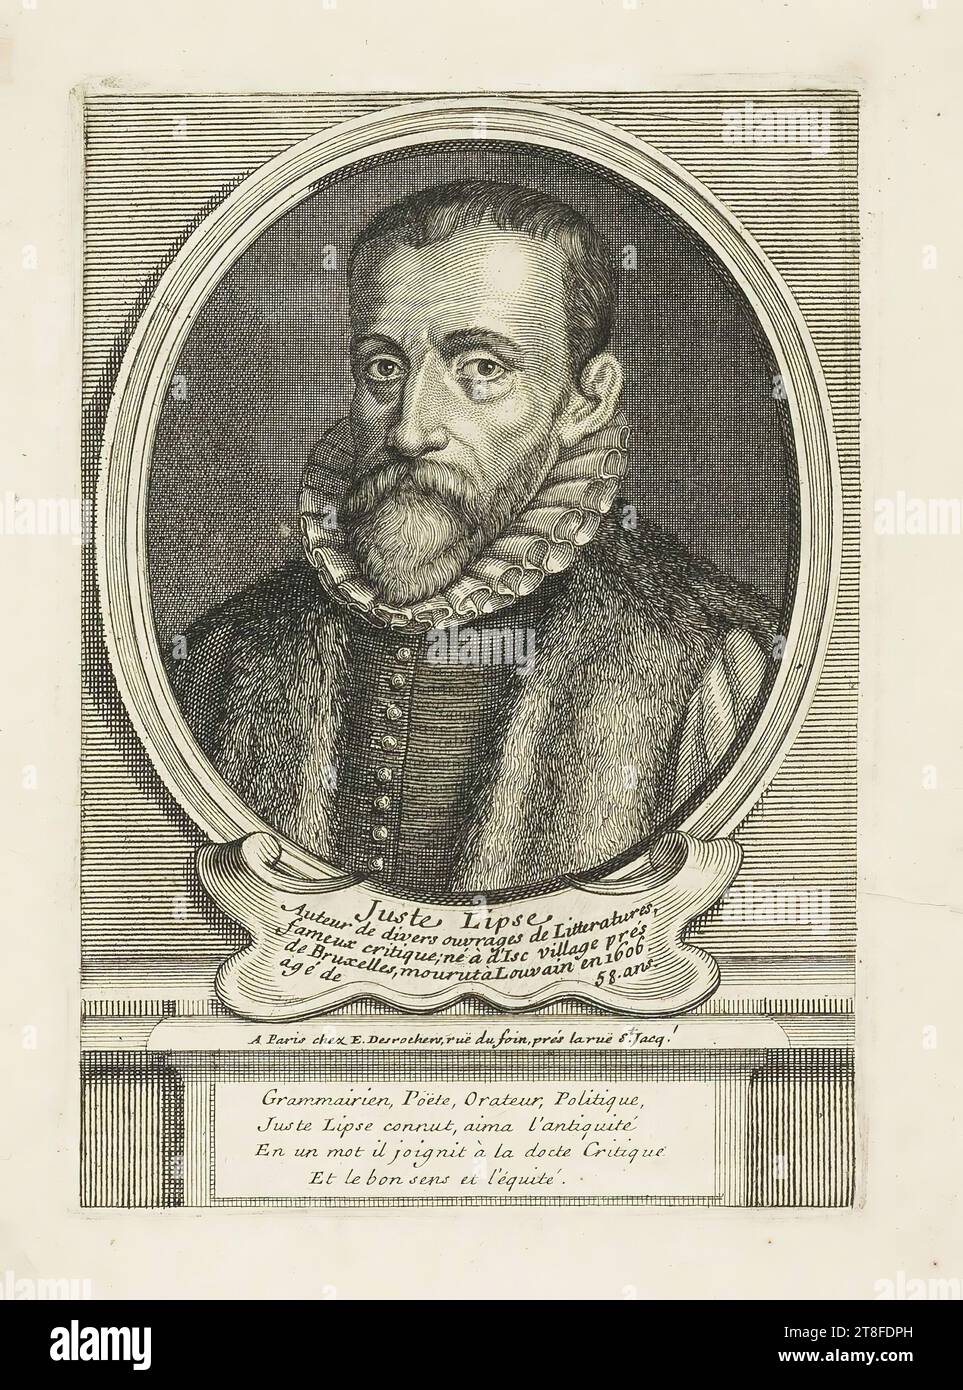 Juste Lipse, Author of various works of Literature, famous critic; born at d'Isc village prés, de Bruxelles, died at Louvain in 1606, aged 58. In Paris at E. Desrochers, rue du Foin, near rue St.Jacq. grammarian, Poet, Orator, Politician, Justus Lipsius knew and loved antiquity, In a word, he joined learned Criticism, And common sense and equity Stock Photo